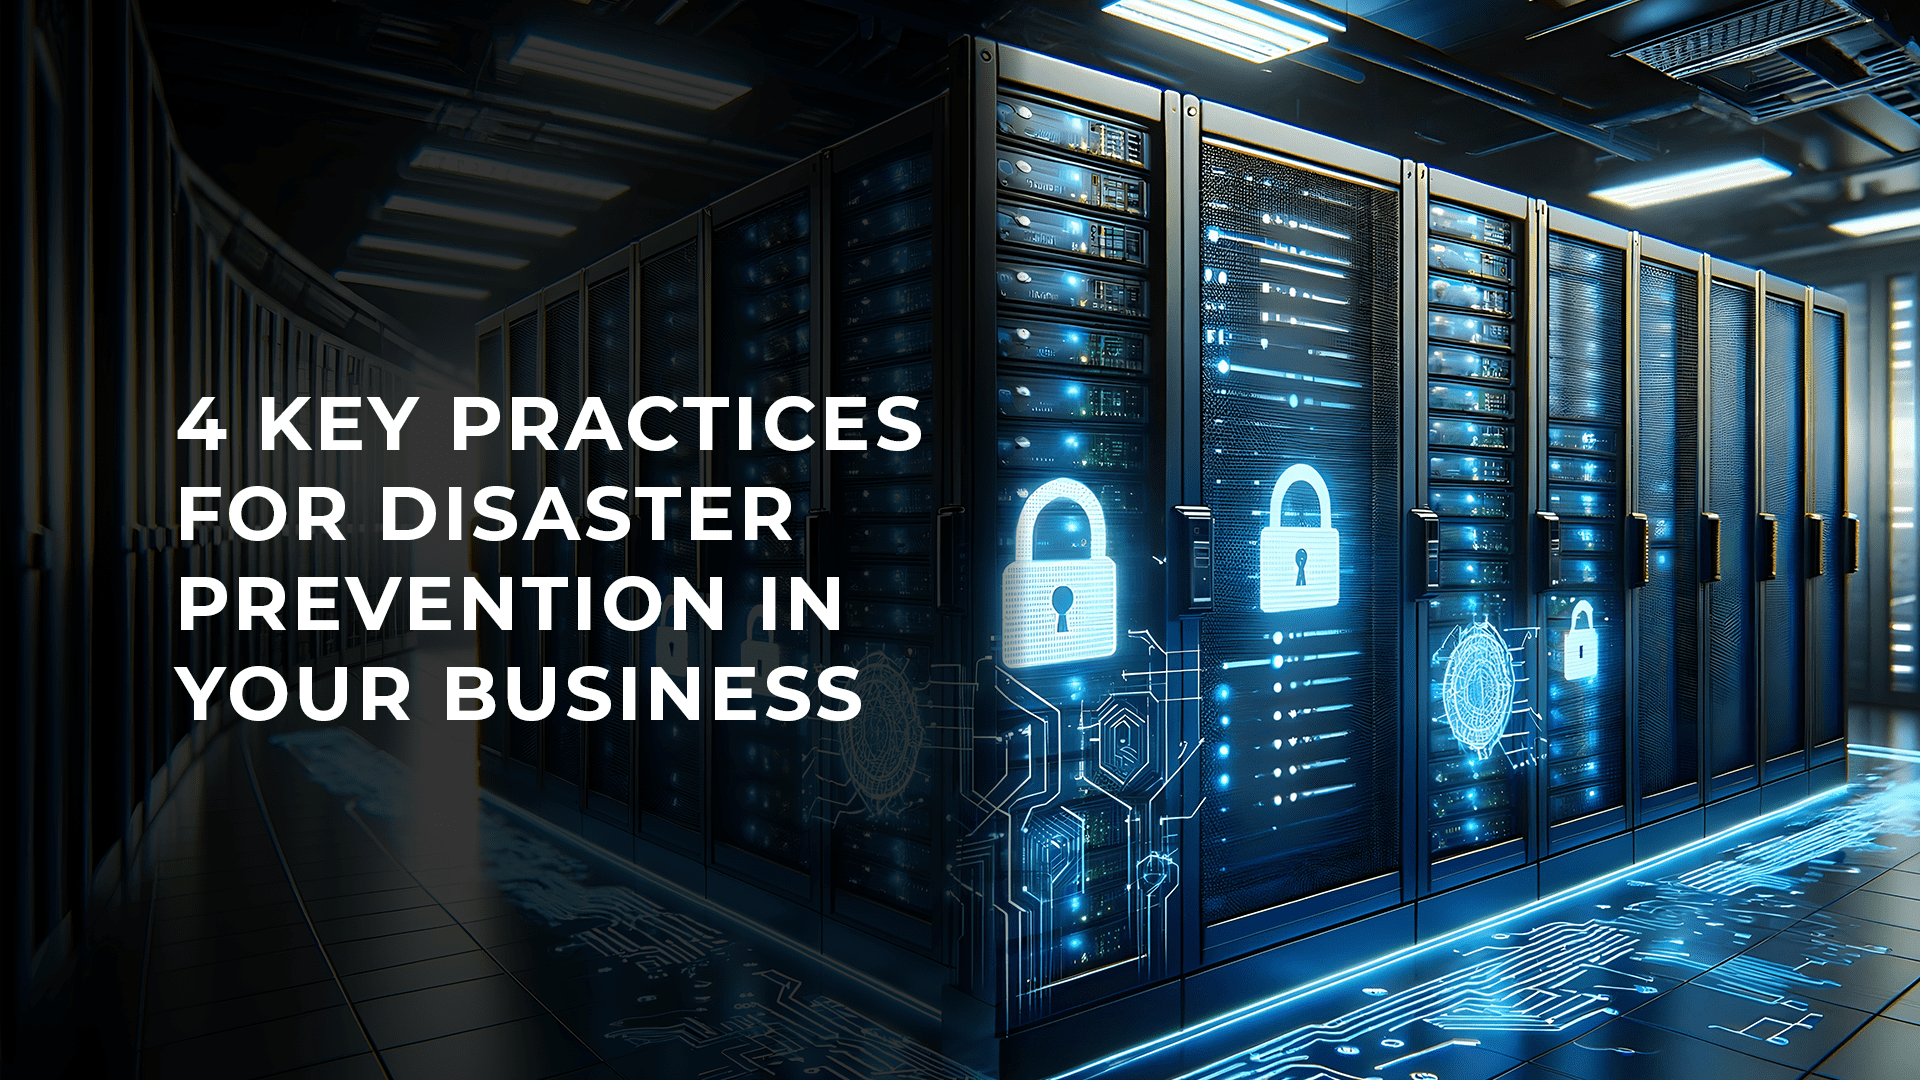 4 Key Practices for Disaster Prevention in Your Business